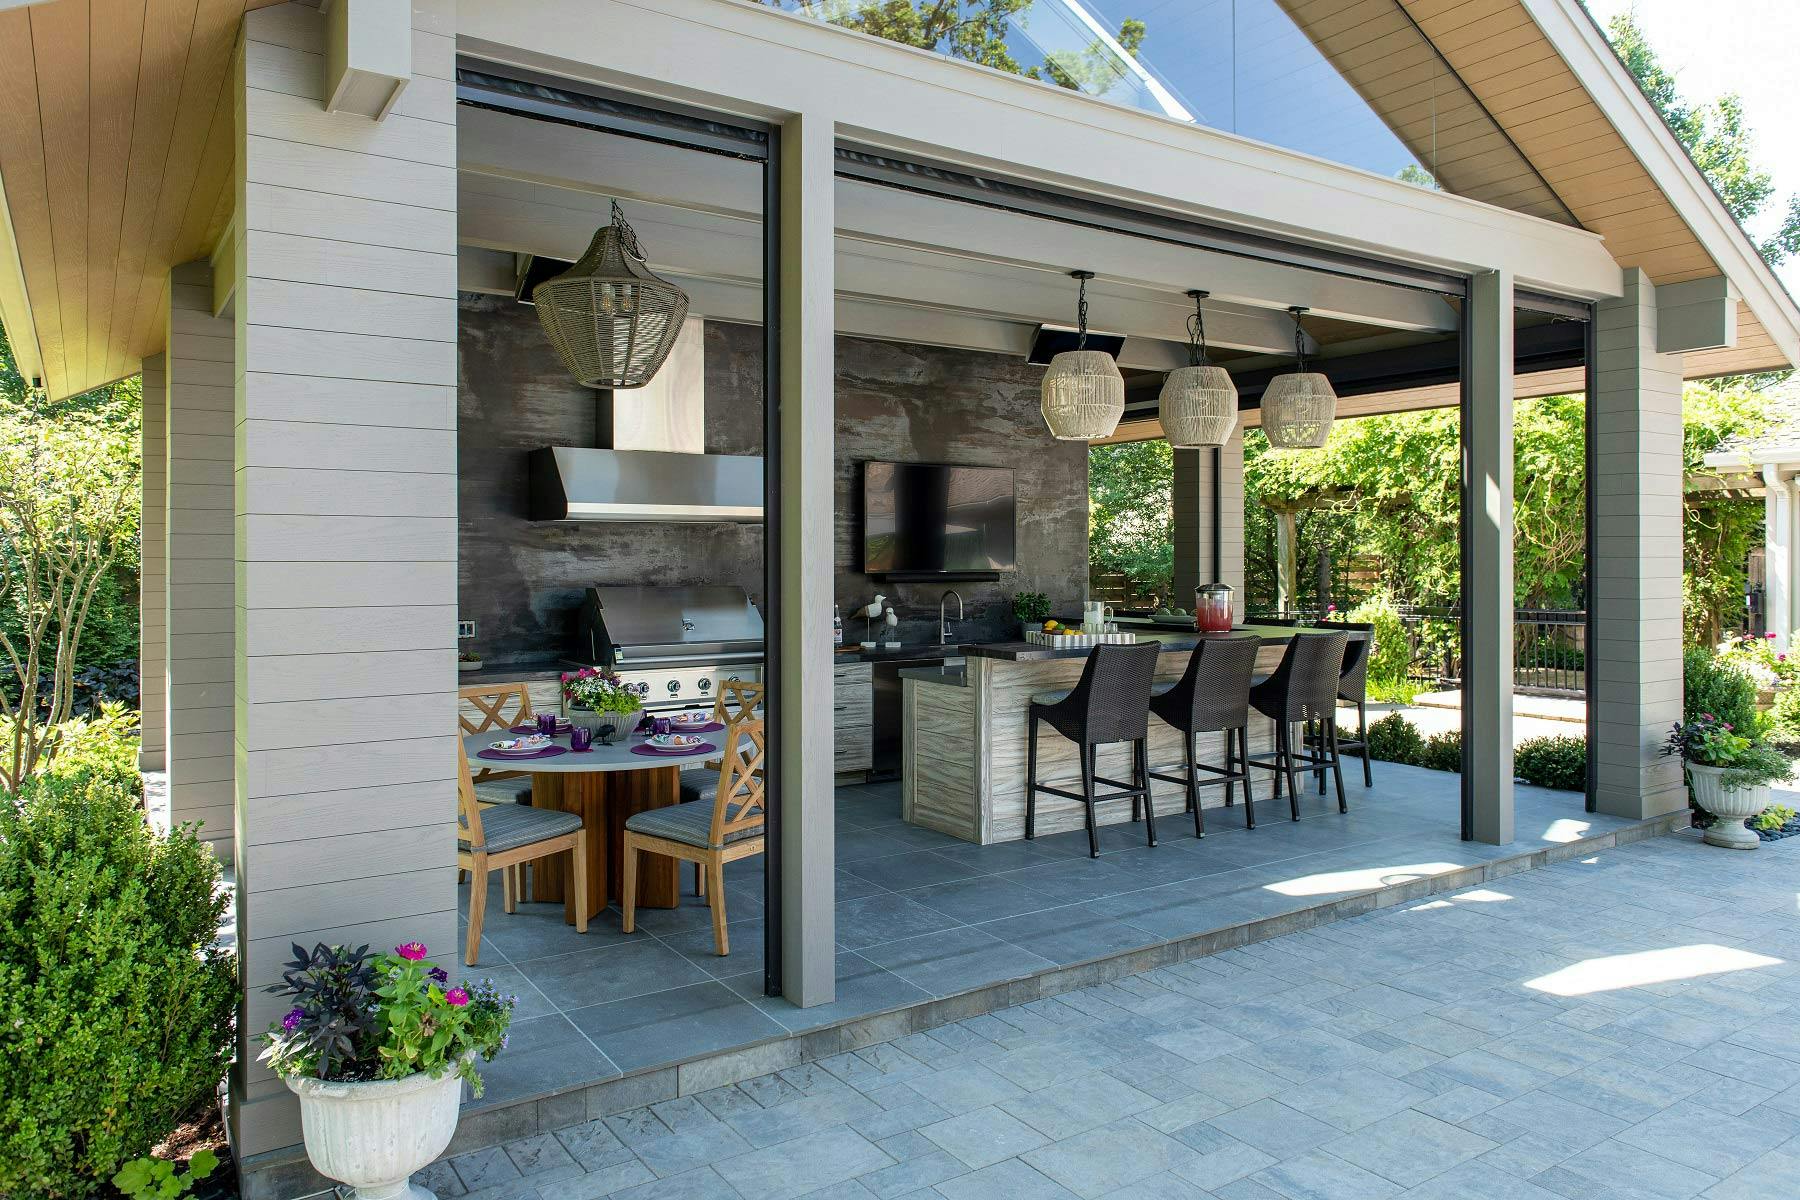 How to Set Up Your Outdoor Kitchen